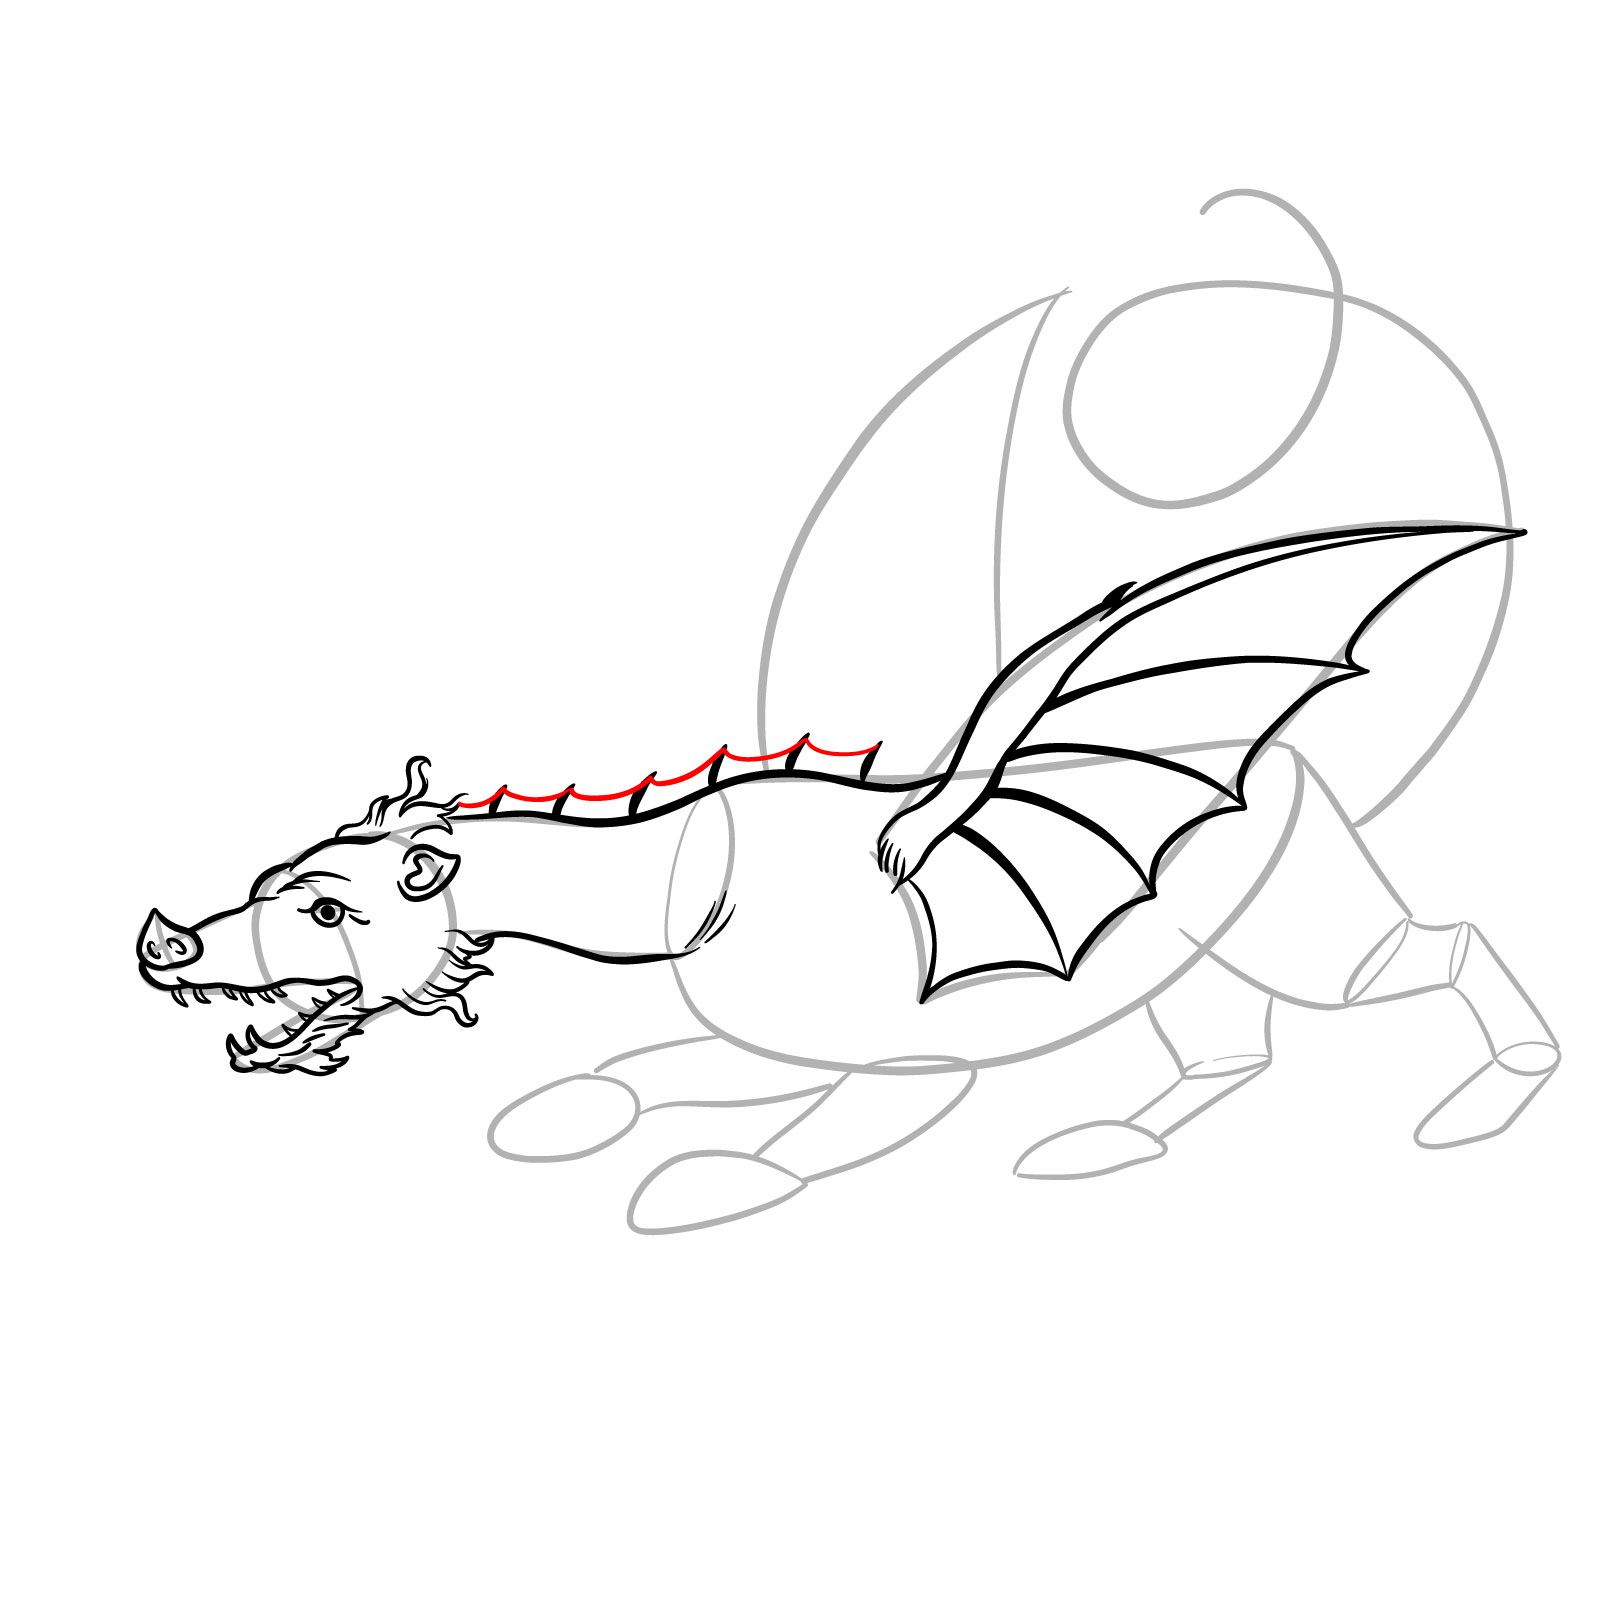 How to draw a classic European dragon - step 21